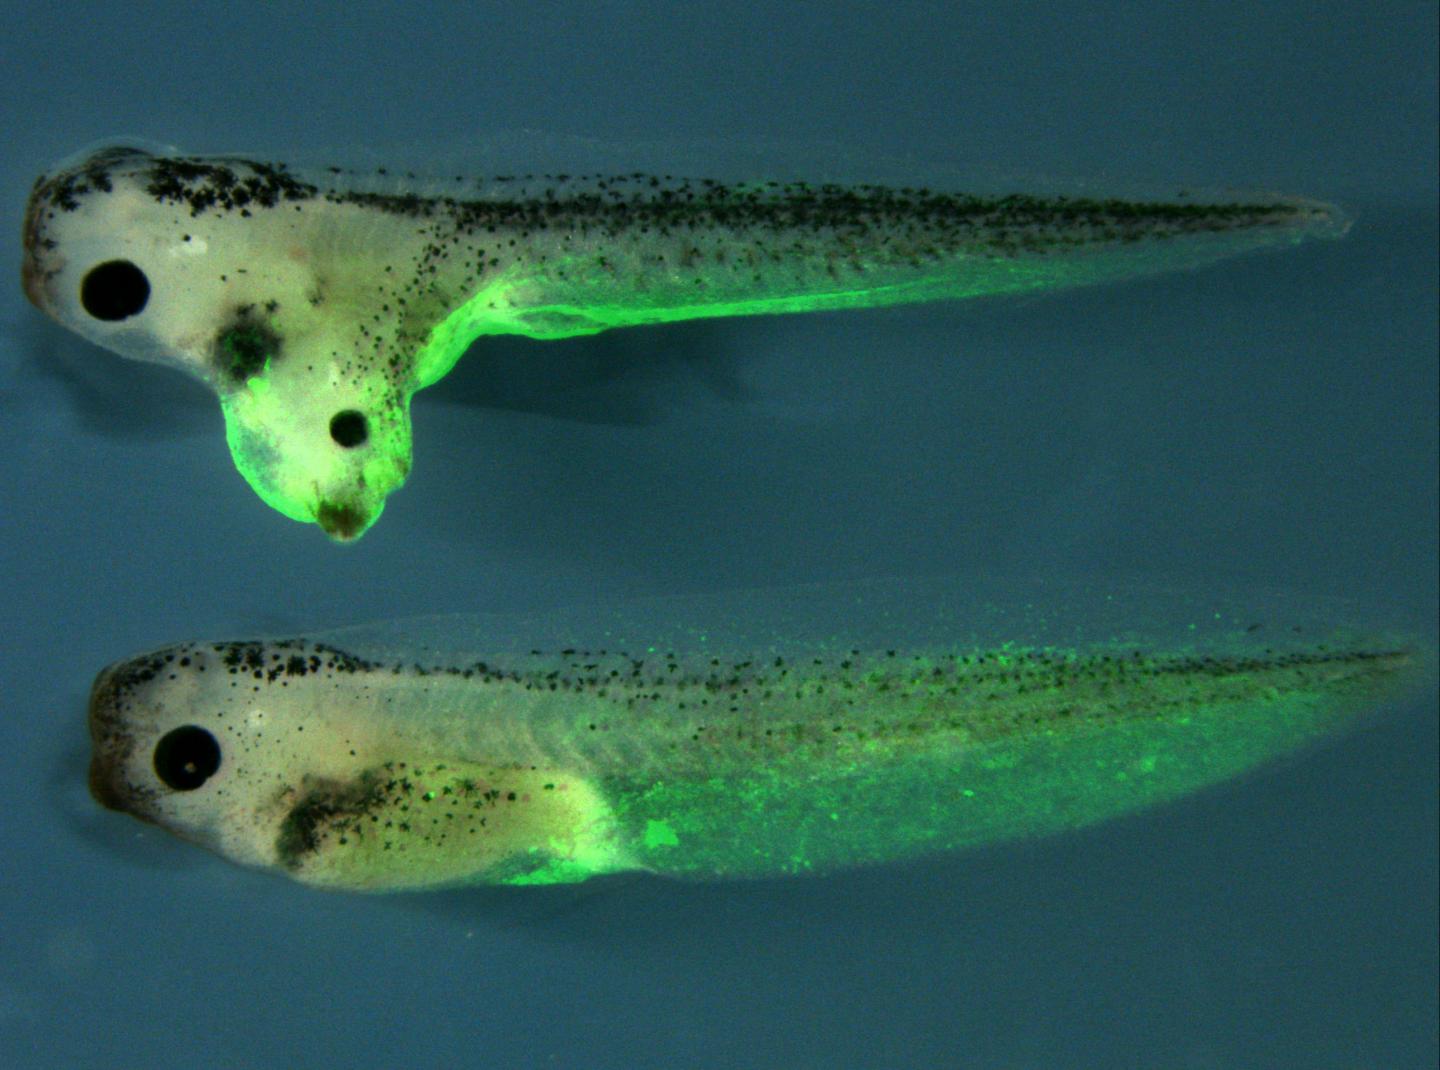 Tadpoles of African Clawed Frogs under Fluorescence